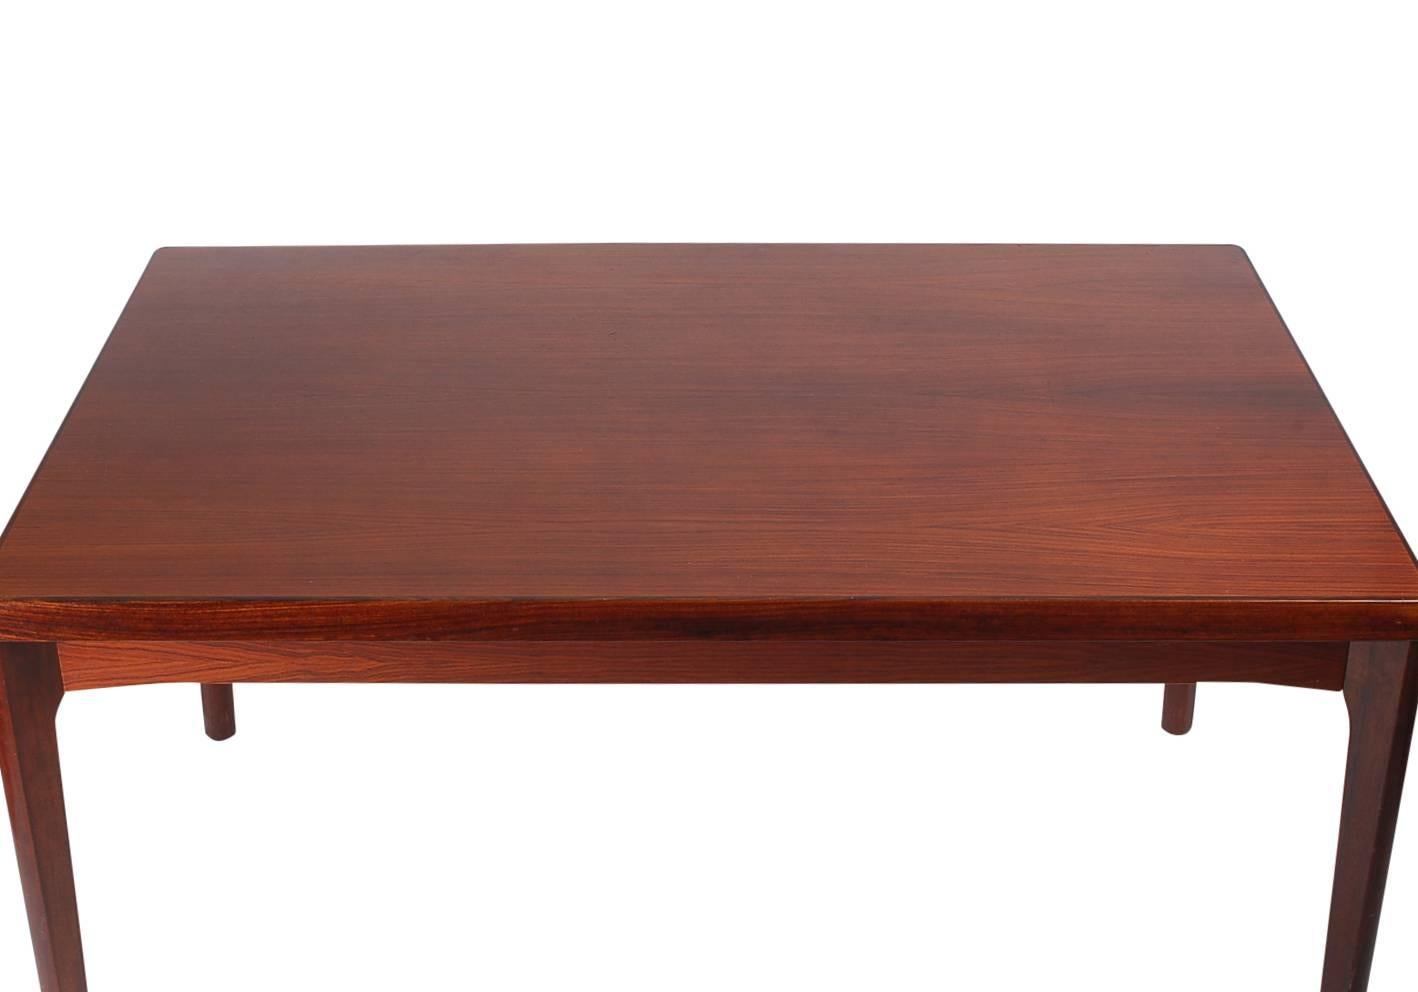 A stunning rosewood dining table by Henning Kjaernulf for Vejle Stole og Møbelfabrik. It features gorgeous rosewood graining with two expandable leaves. Manufacturers stamp on bottom.

In the style of: Niels Moller, Finn Juhl, Hans Wegner.